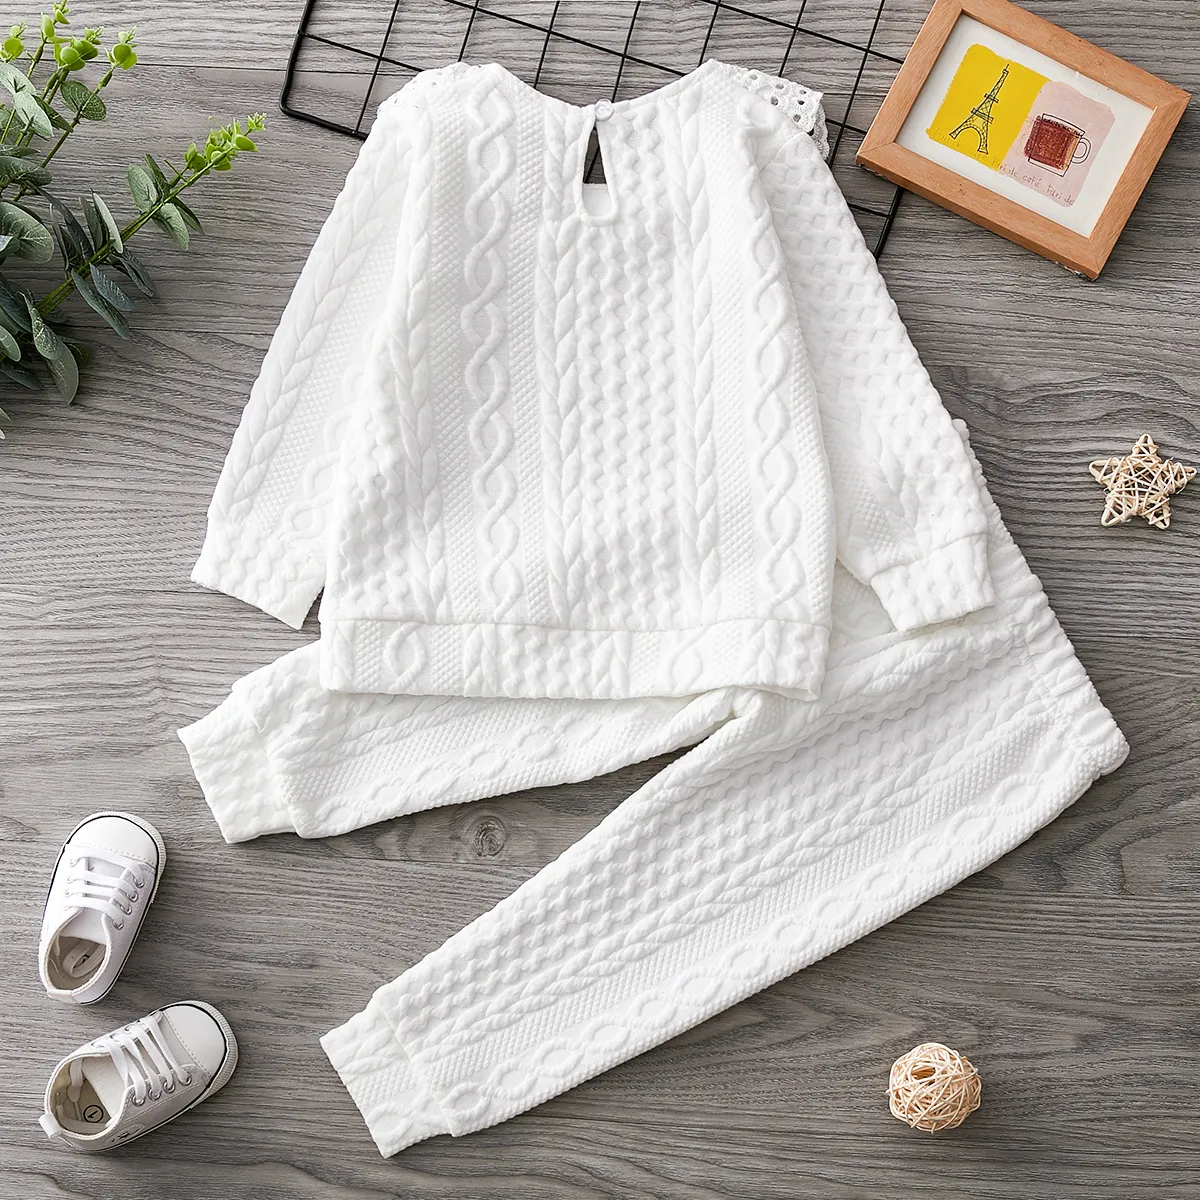 2-piece Toddler Girl Schiffy Flounce Cable Knit Sweater and Pants Set White big image 1